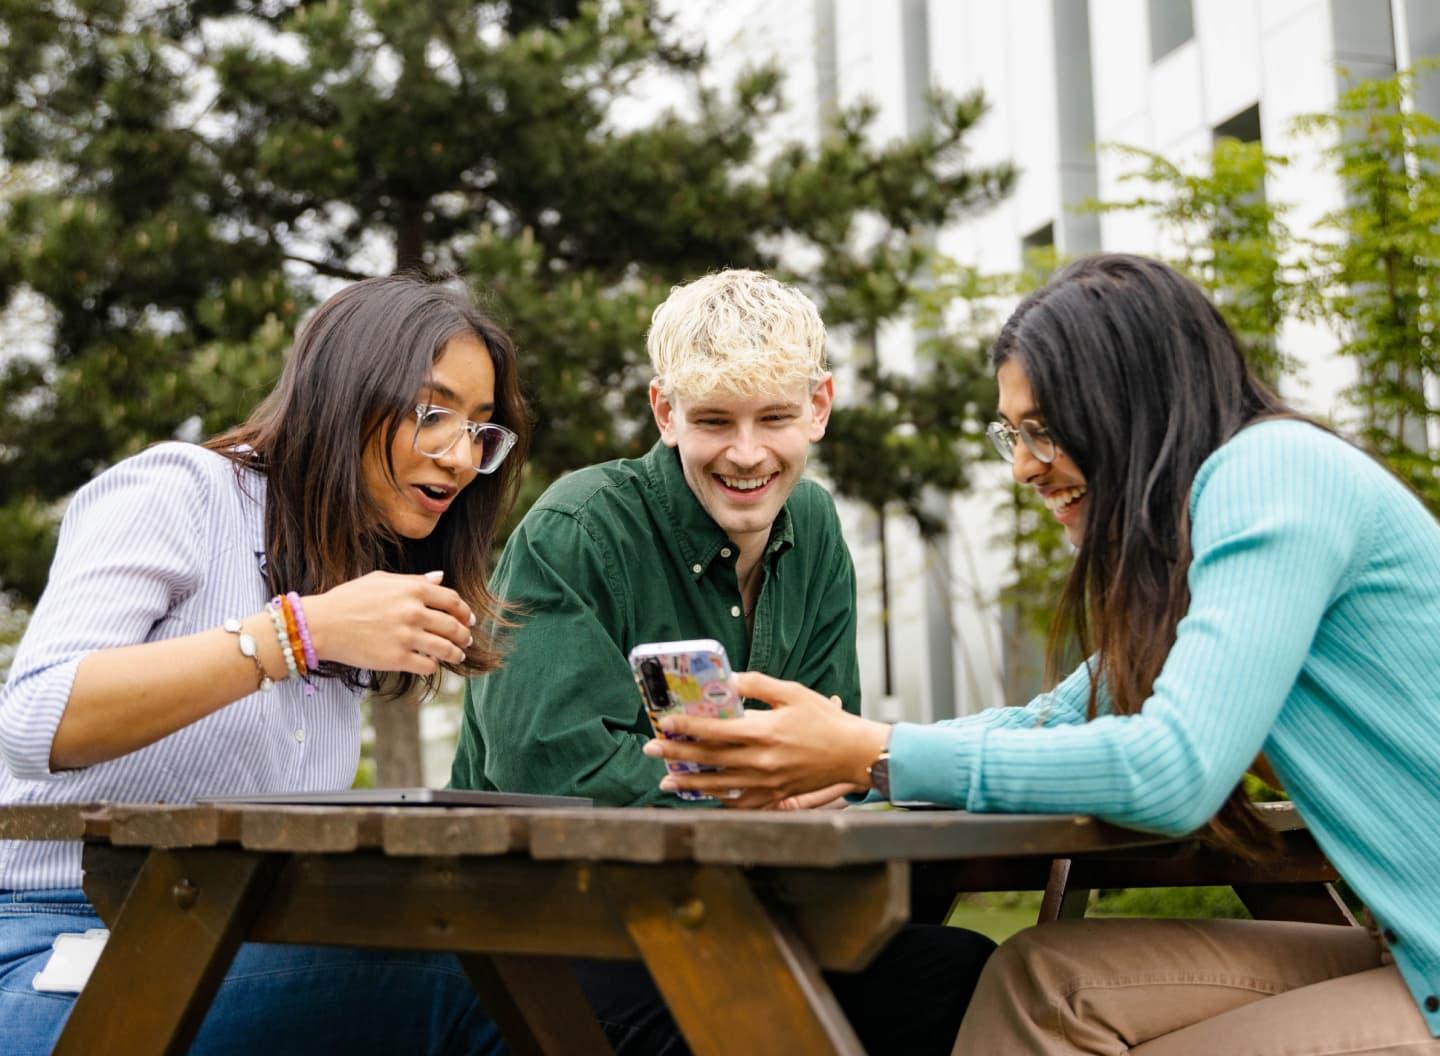 group of people look at a phone screen on a outdoor bench